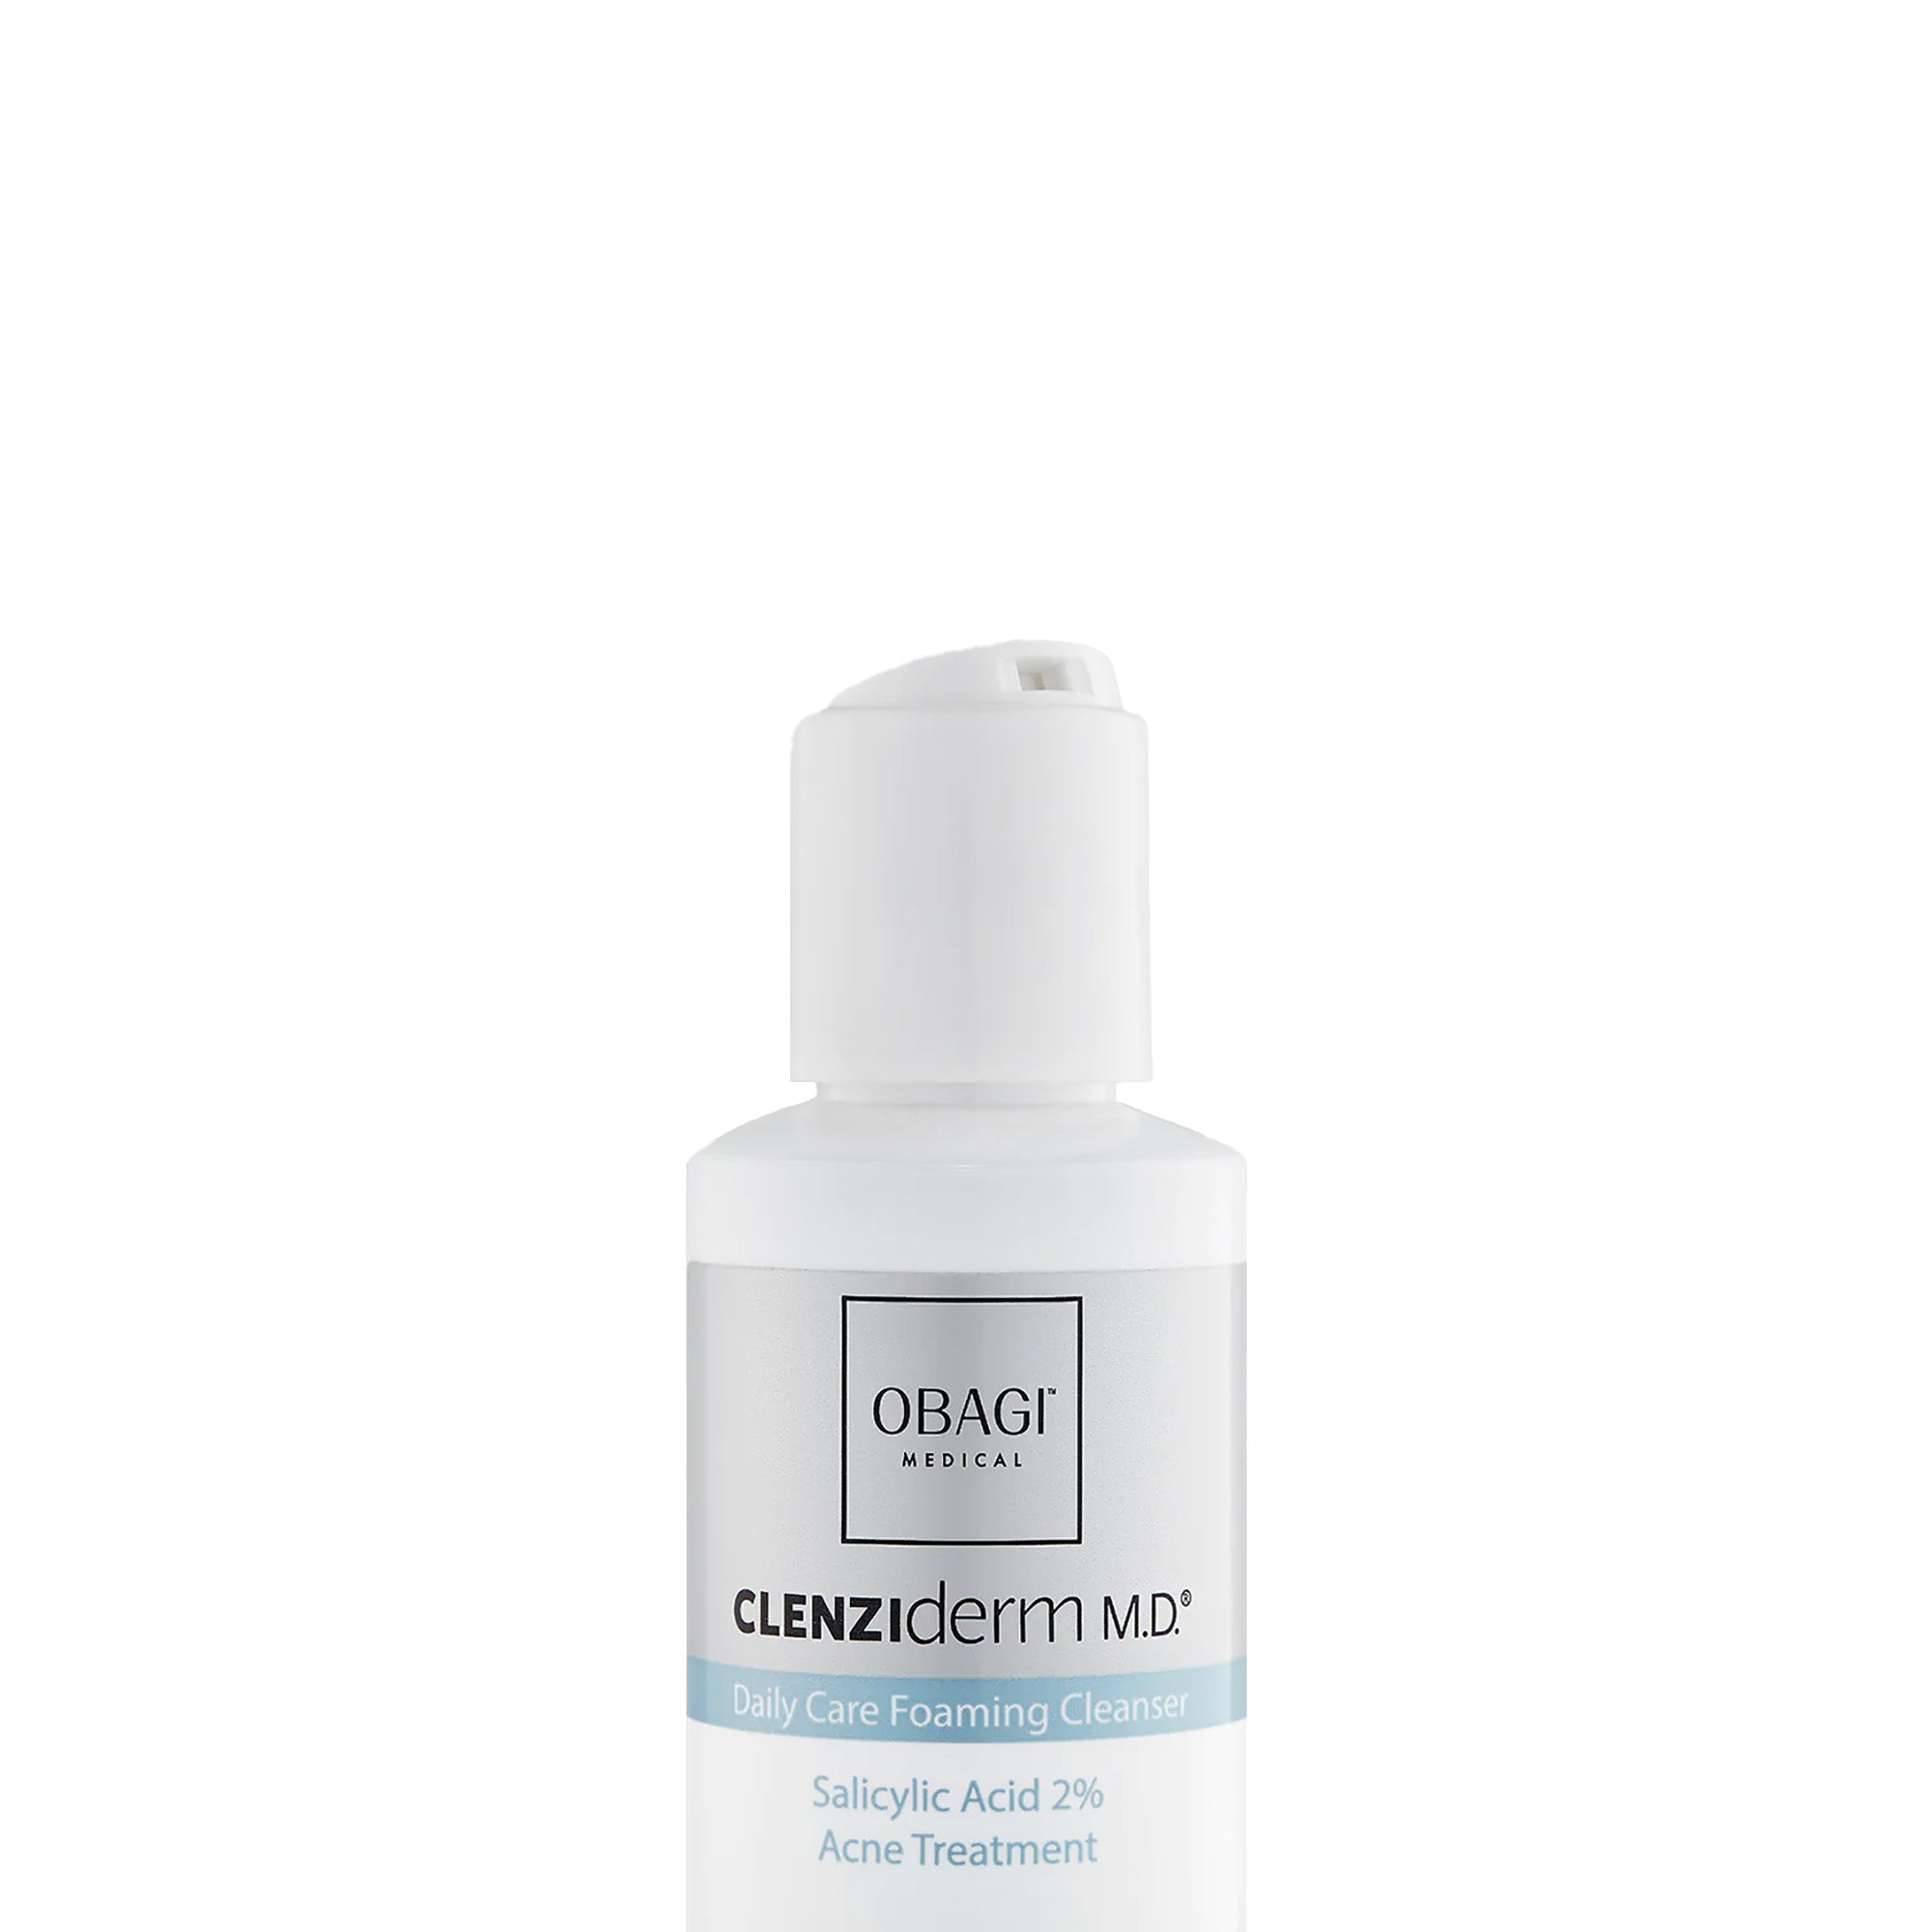 Obagi CLENZIderm M.D. System: Daily Care Foaming Cleanser Normal to Oily